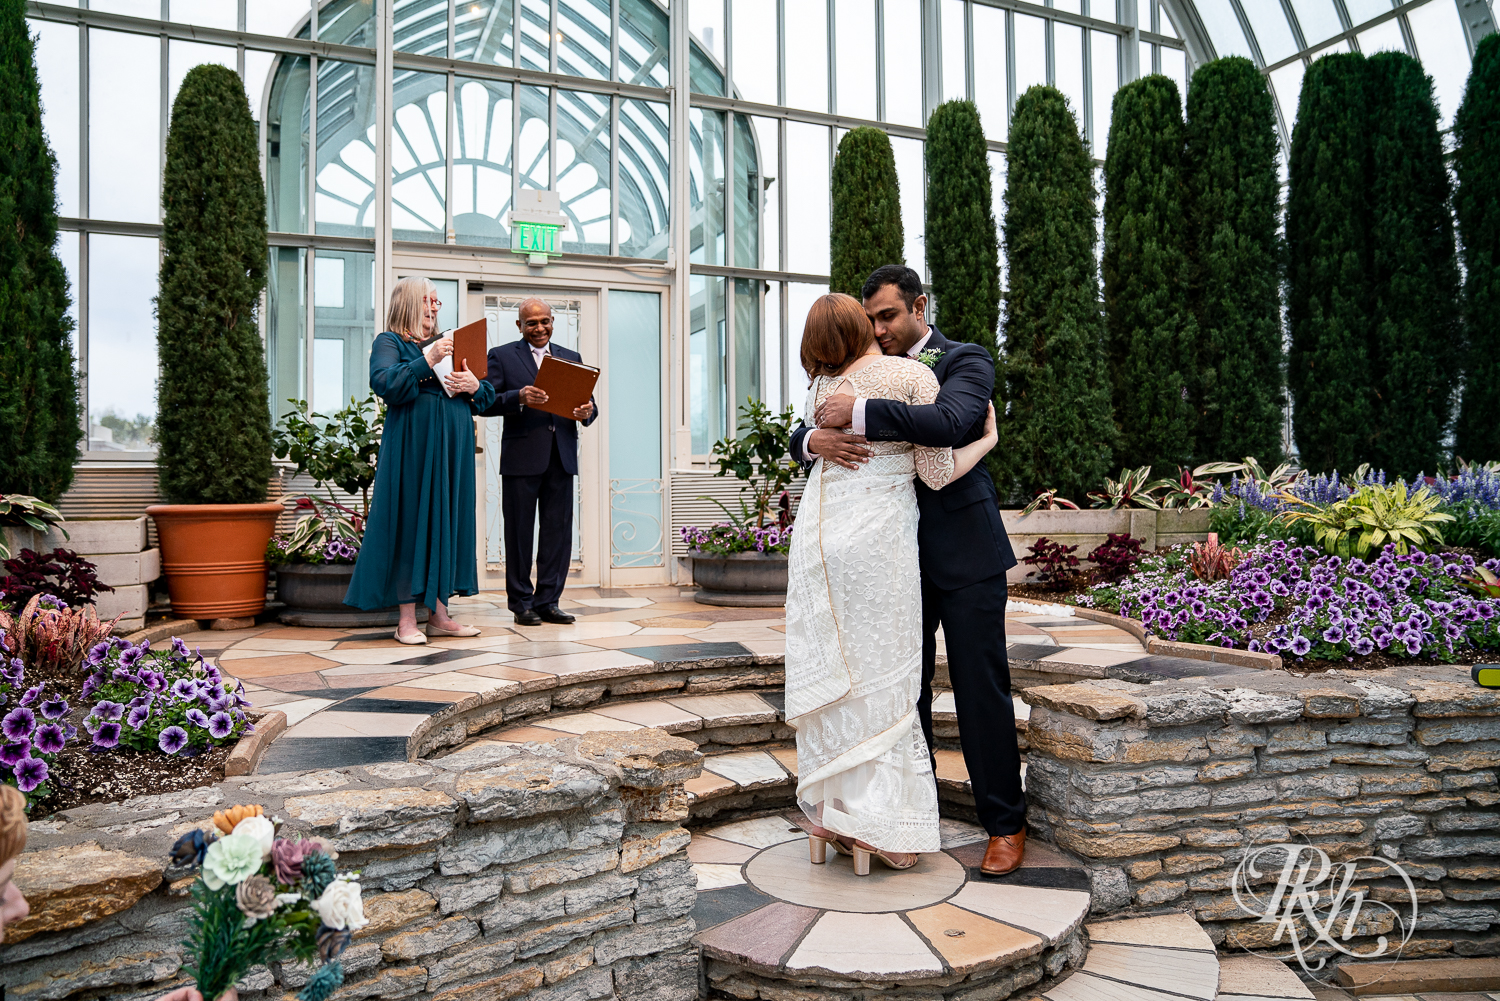 Bride and groom hug during ceremony at Indian wedding at Como Zoo Conservatory in Saint Paul, Minnesota.